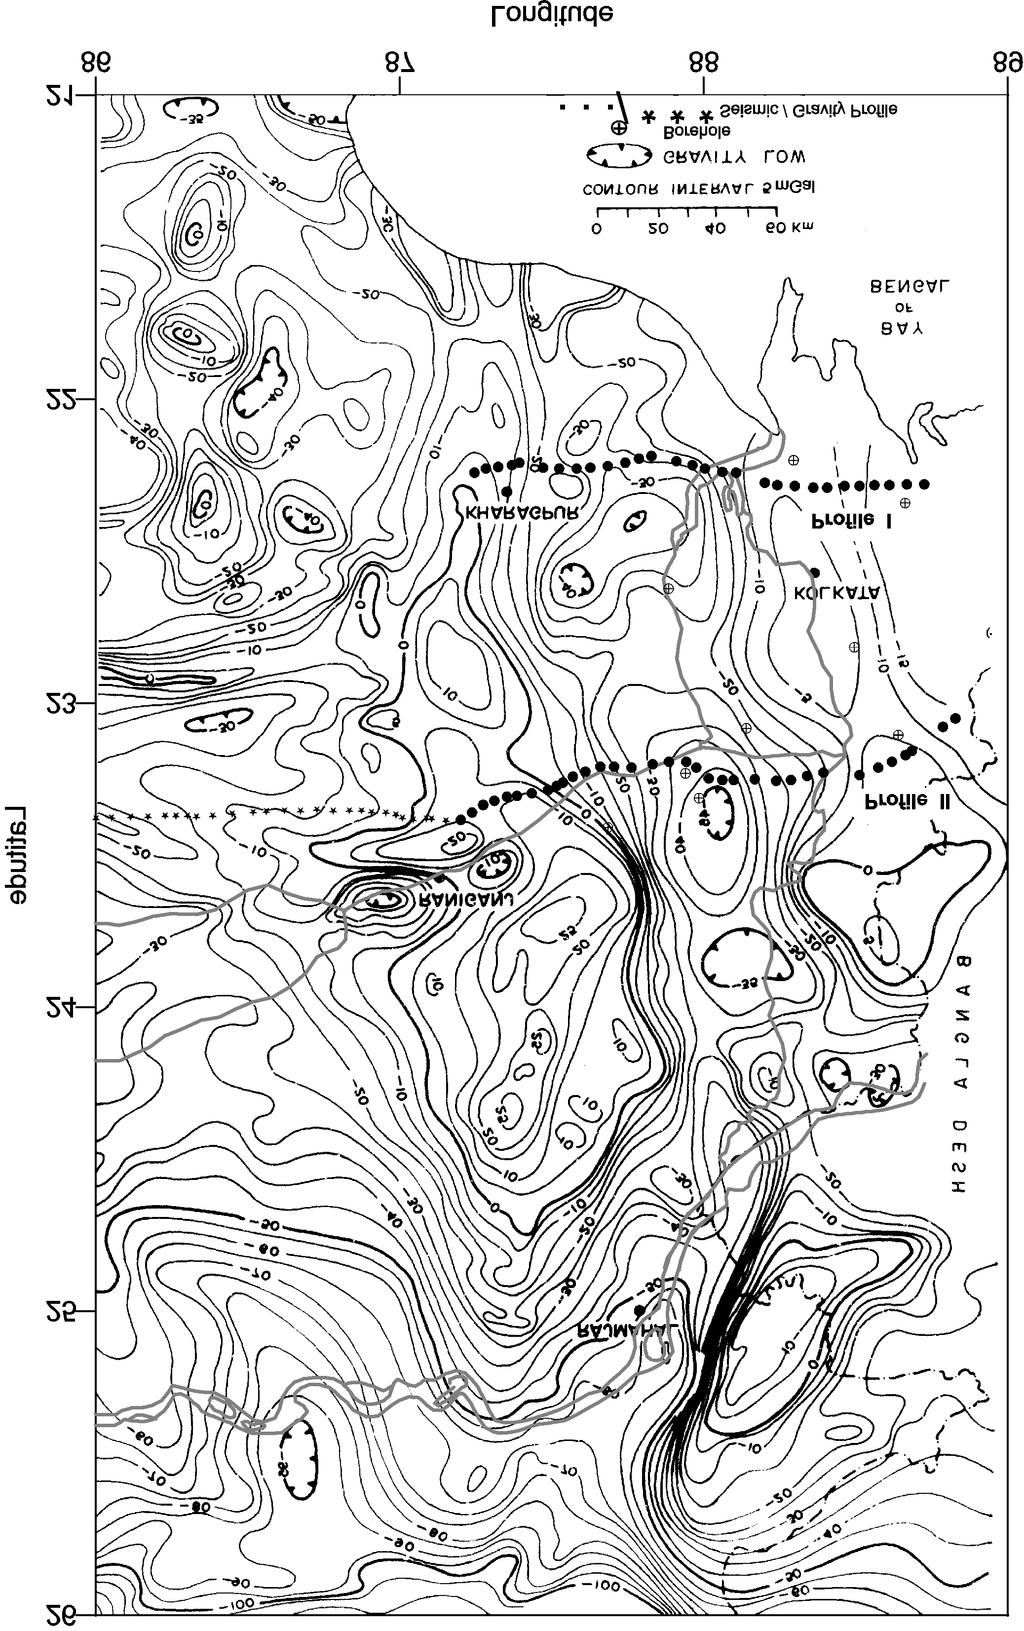 762 A P Singh, N Kumar and B Singh Figure 2. Bouguer anomaly map (in mgal) of the Rajmahal Traps region (NGRI, 1978) along with the course of rivers Ganga and Damodar.